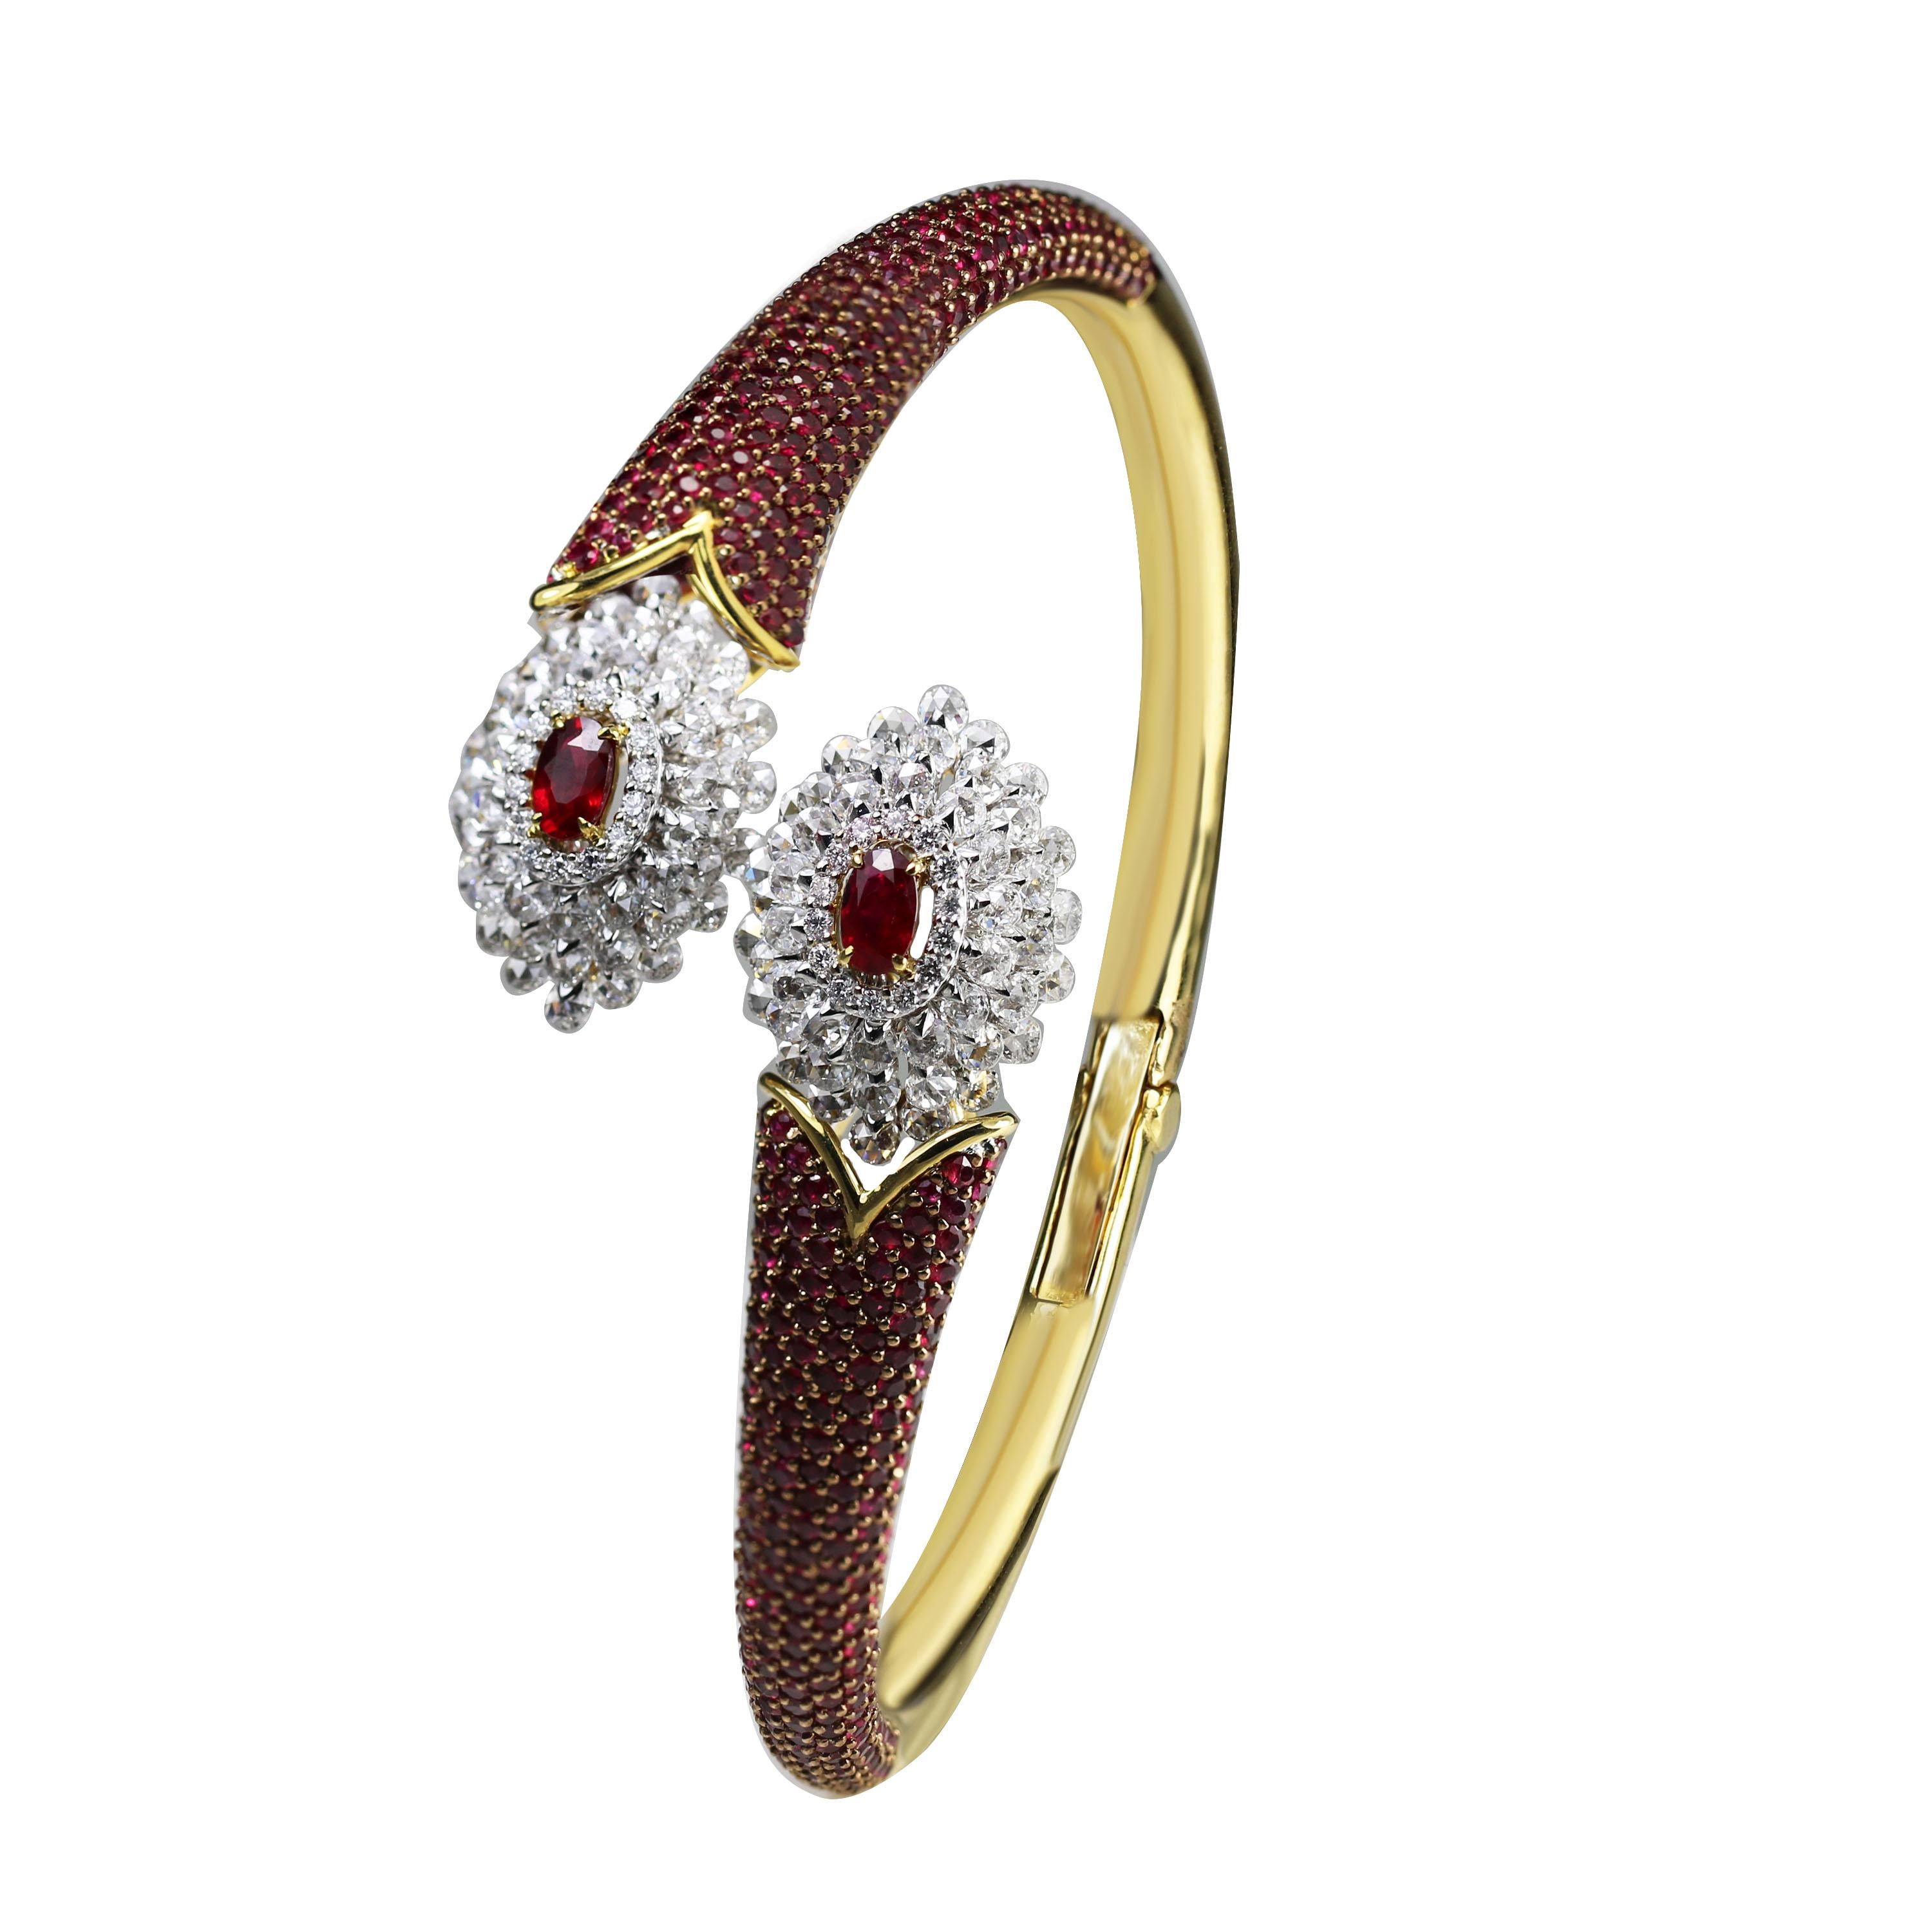 Ruby and diamond bracelet

The combination of 18K white and yellow gold along with rubies and diamonds is what gives this bracelet a slightly traditional feel, adding to its charm. Generously encrusted round rose cut and round brilliant cut diamonds